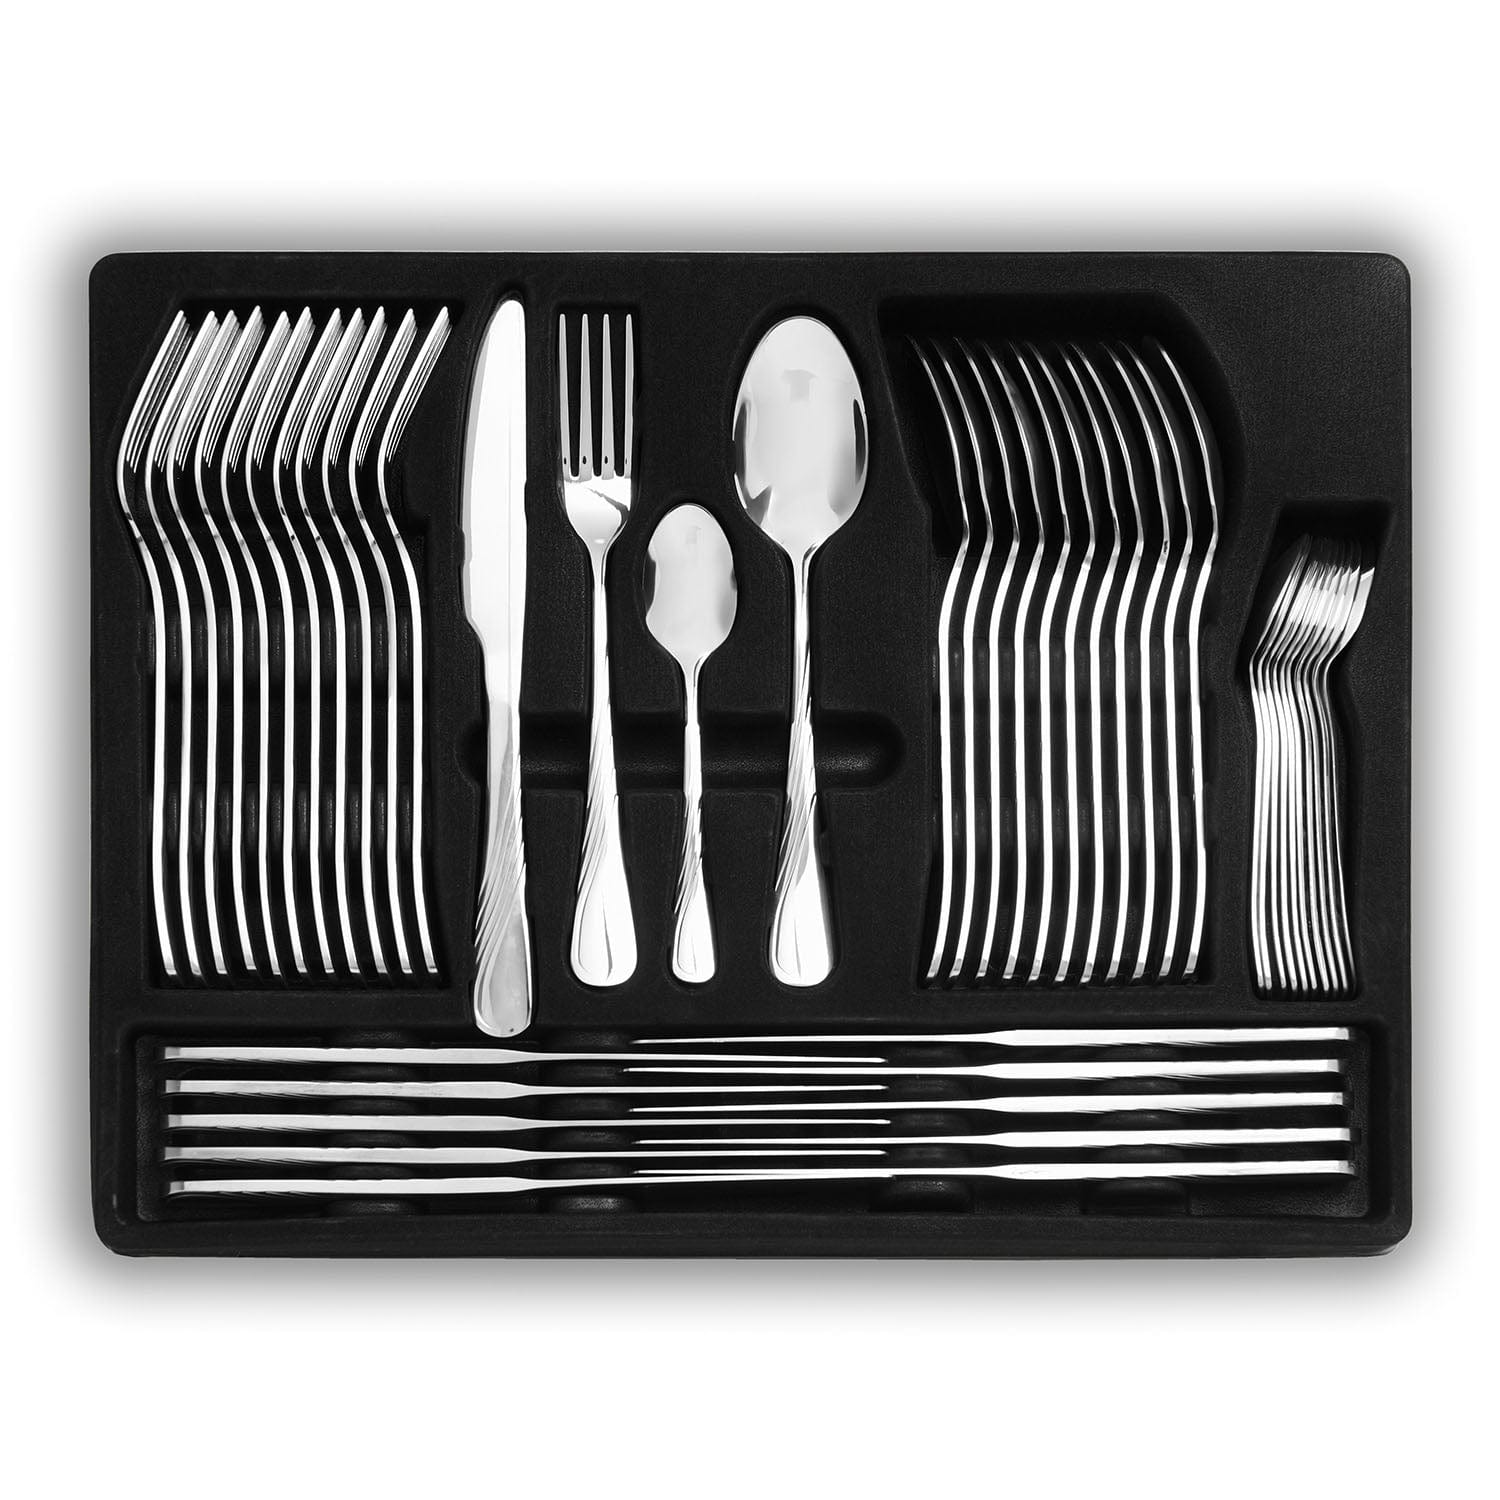 CLOONEY 68PC CUTLERY SET SILVER